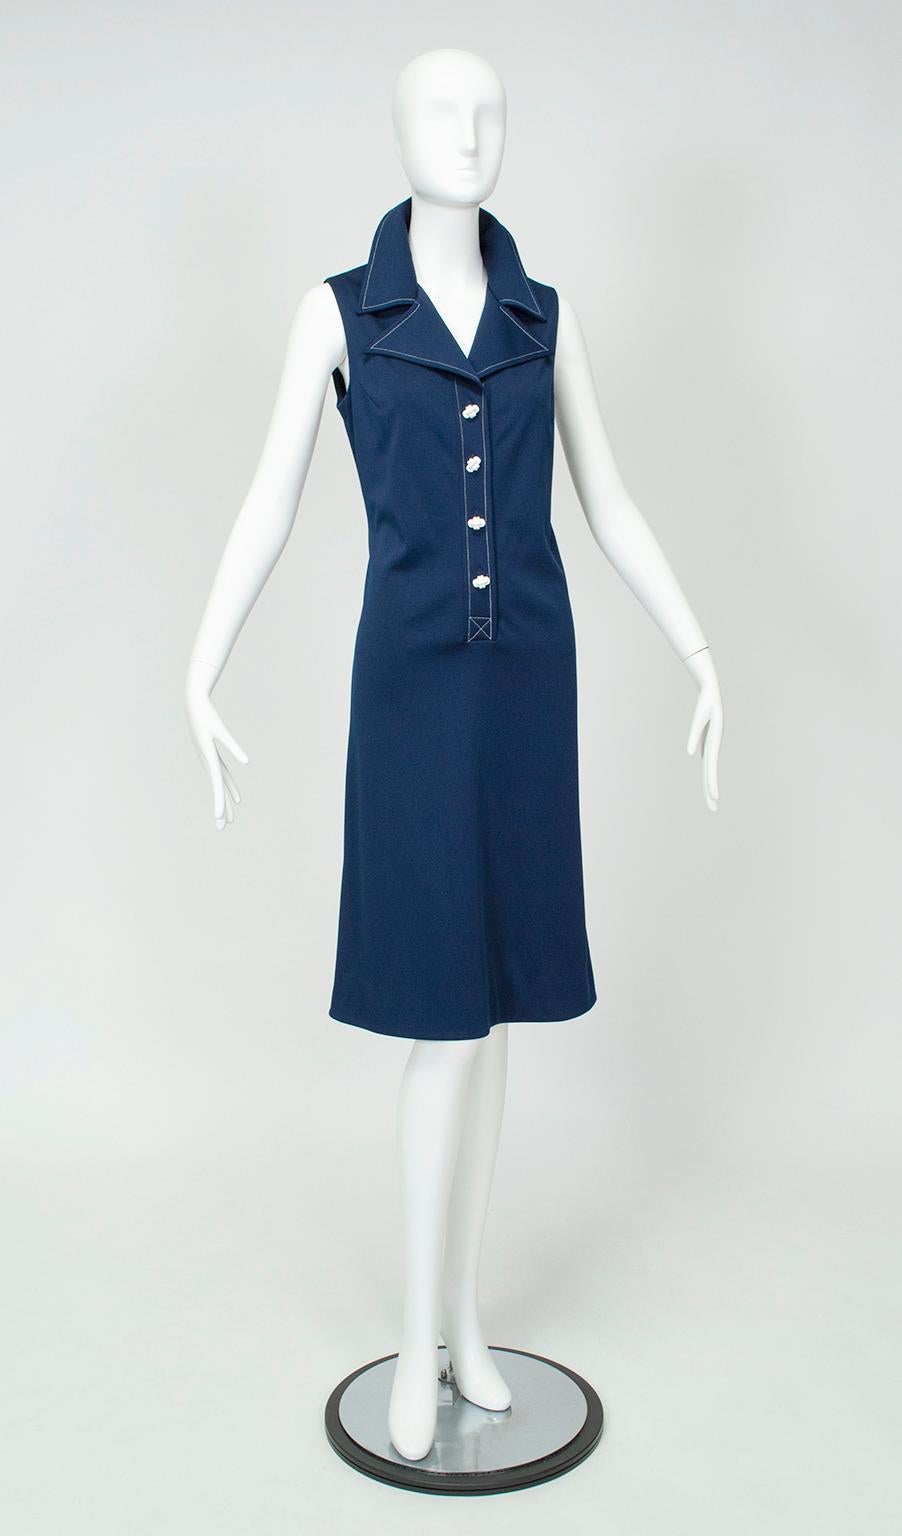 Known for her easy, swirling and practical dresses, Edith Flagg was famous for her use of polyester jersey for good reason: she was the first designer to import the fabric for fashion use in the United States. This dress’s simple trumpet cut,